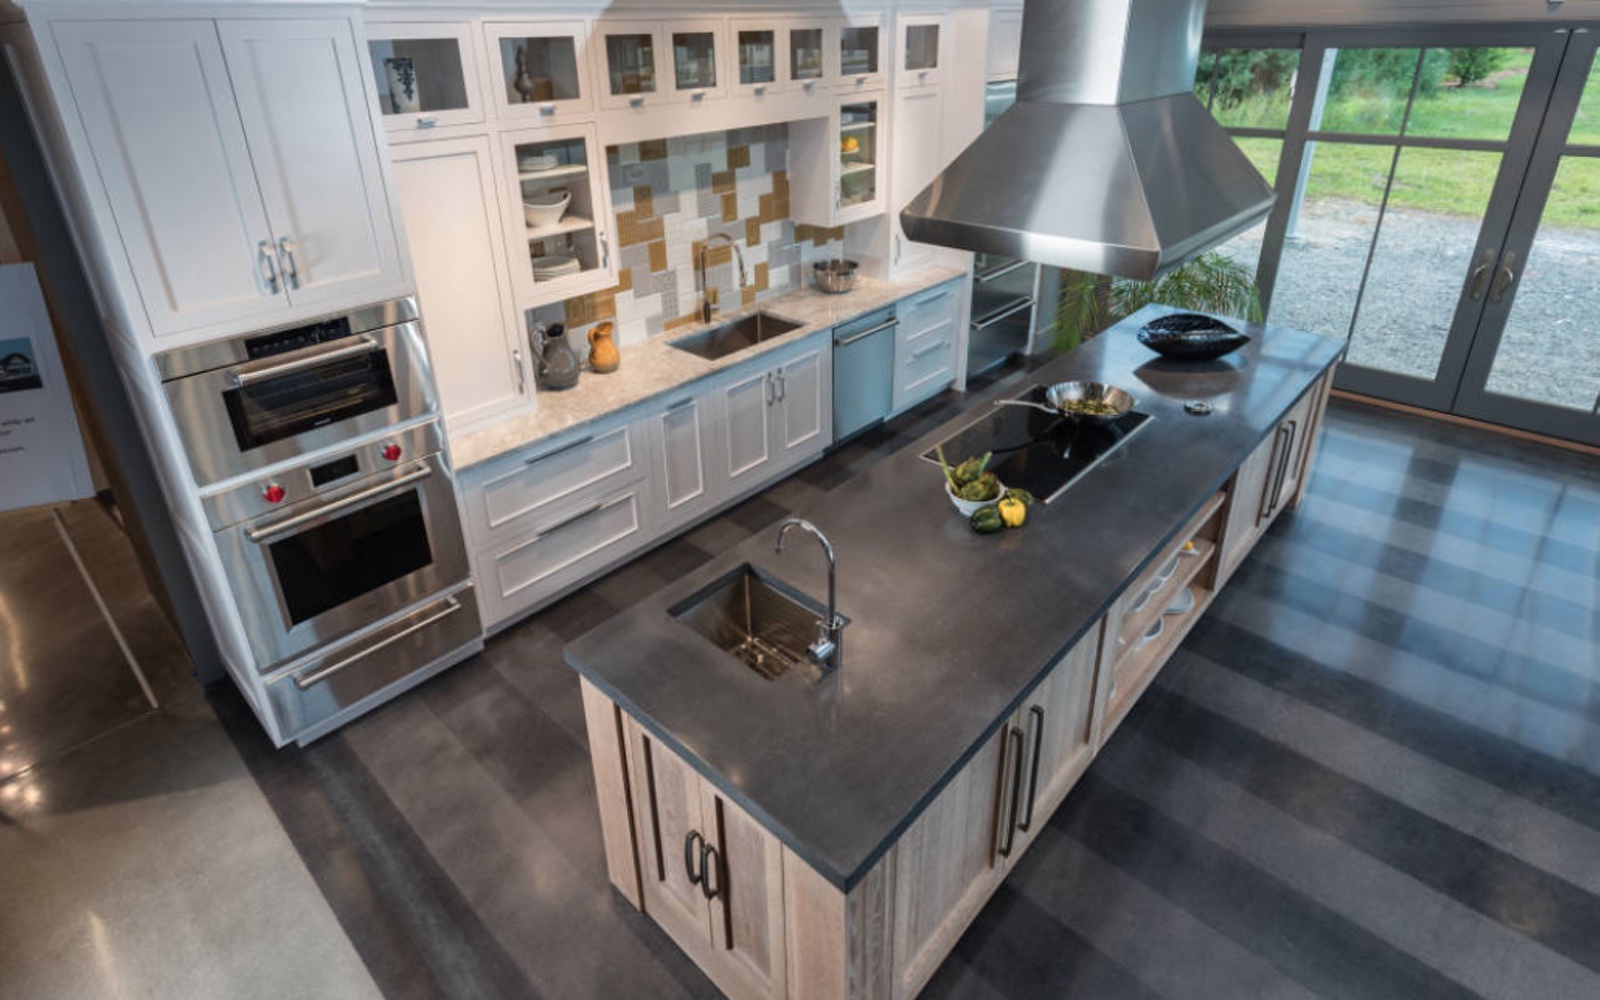 Discover the Best Kitchen and Bath Showrooms in Greater Boston